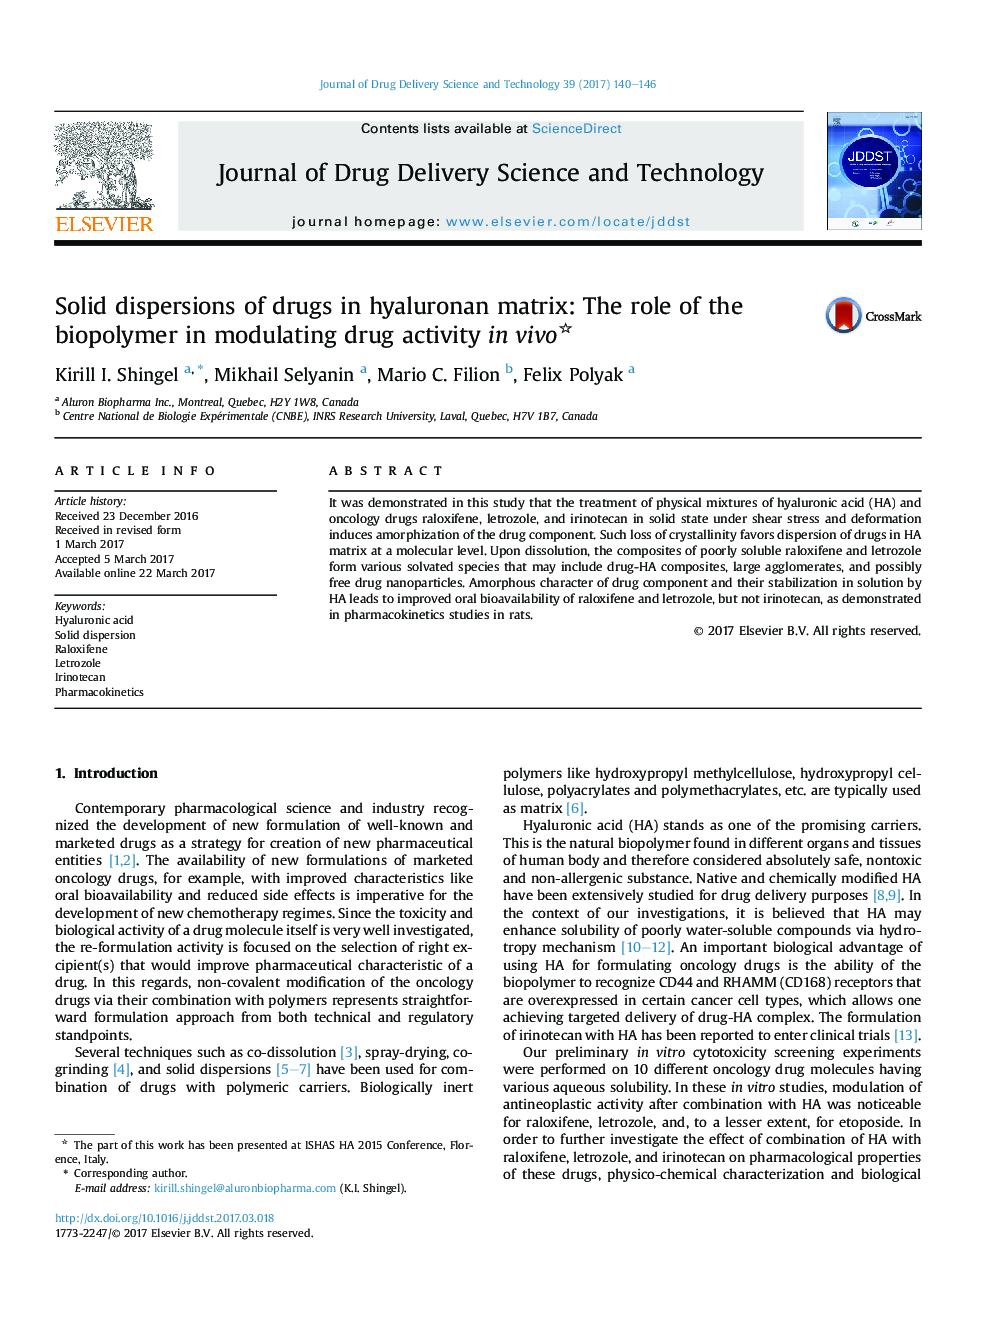 Solid dispersions of drugs in hyaluronan matrix: The role of the biopolymer in modulating drug activity inÂ vivo